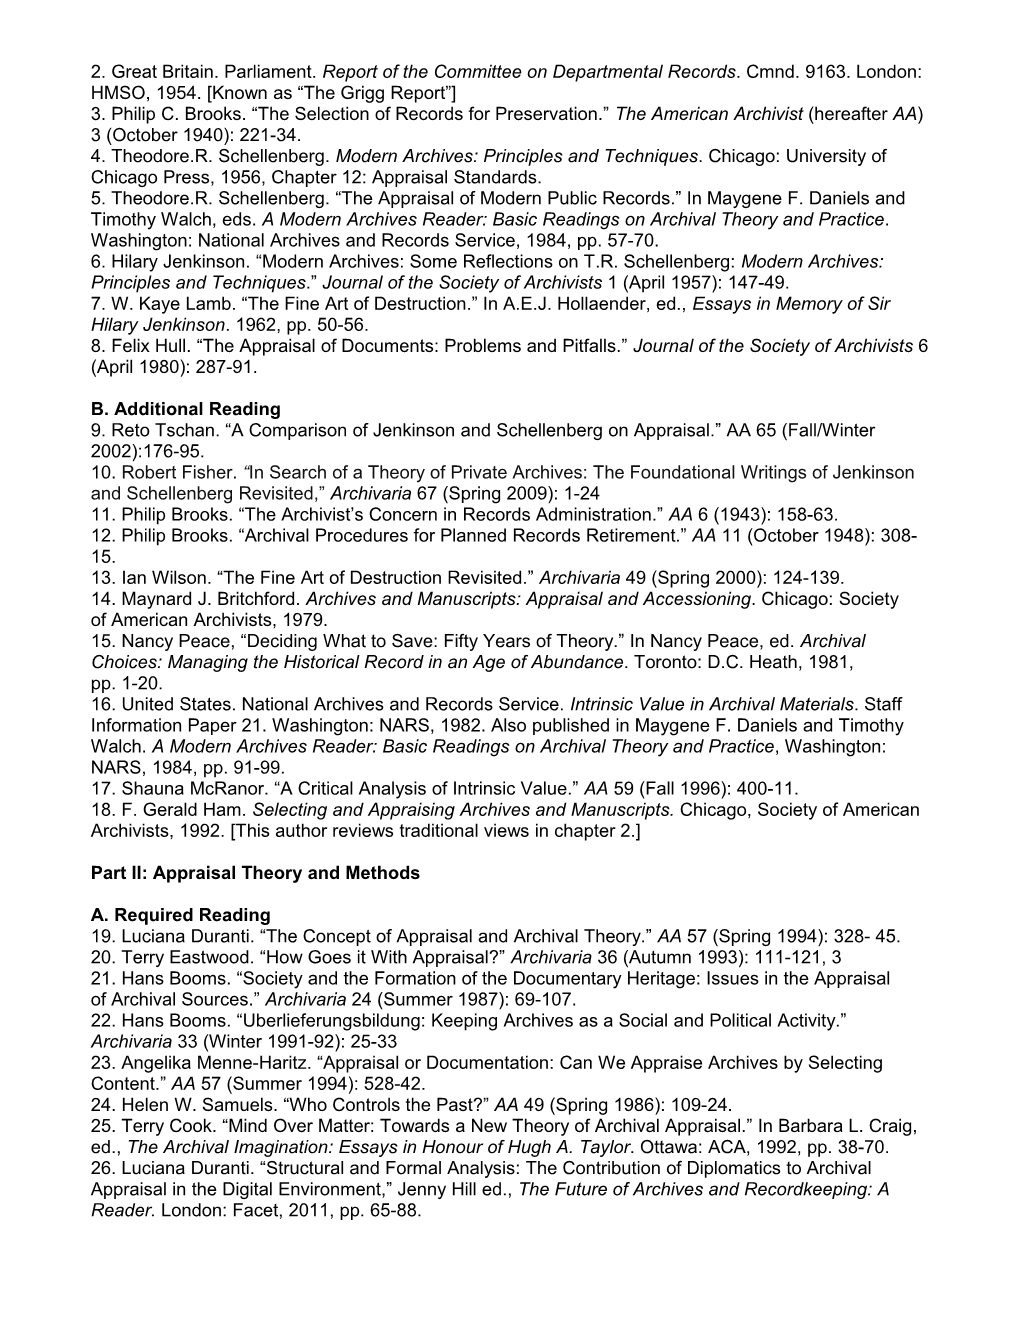 ARST 520 Selection and Acquisition of Archival Documents (3) Course Syllabus